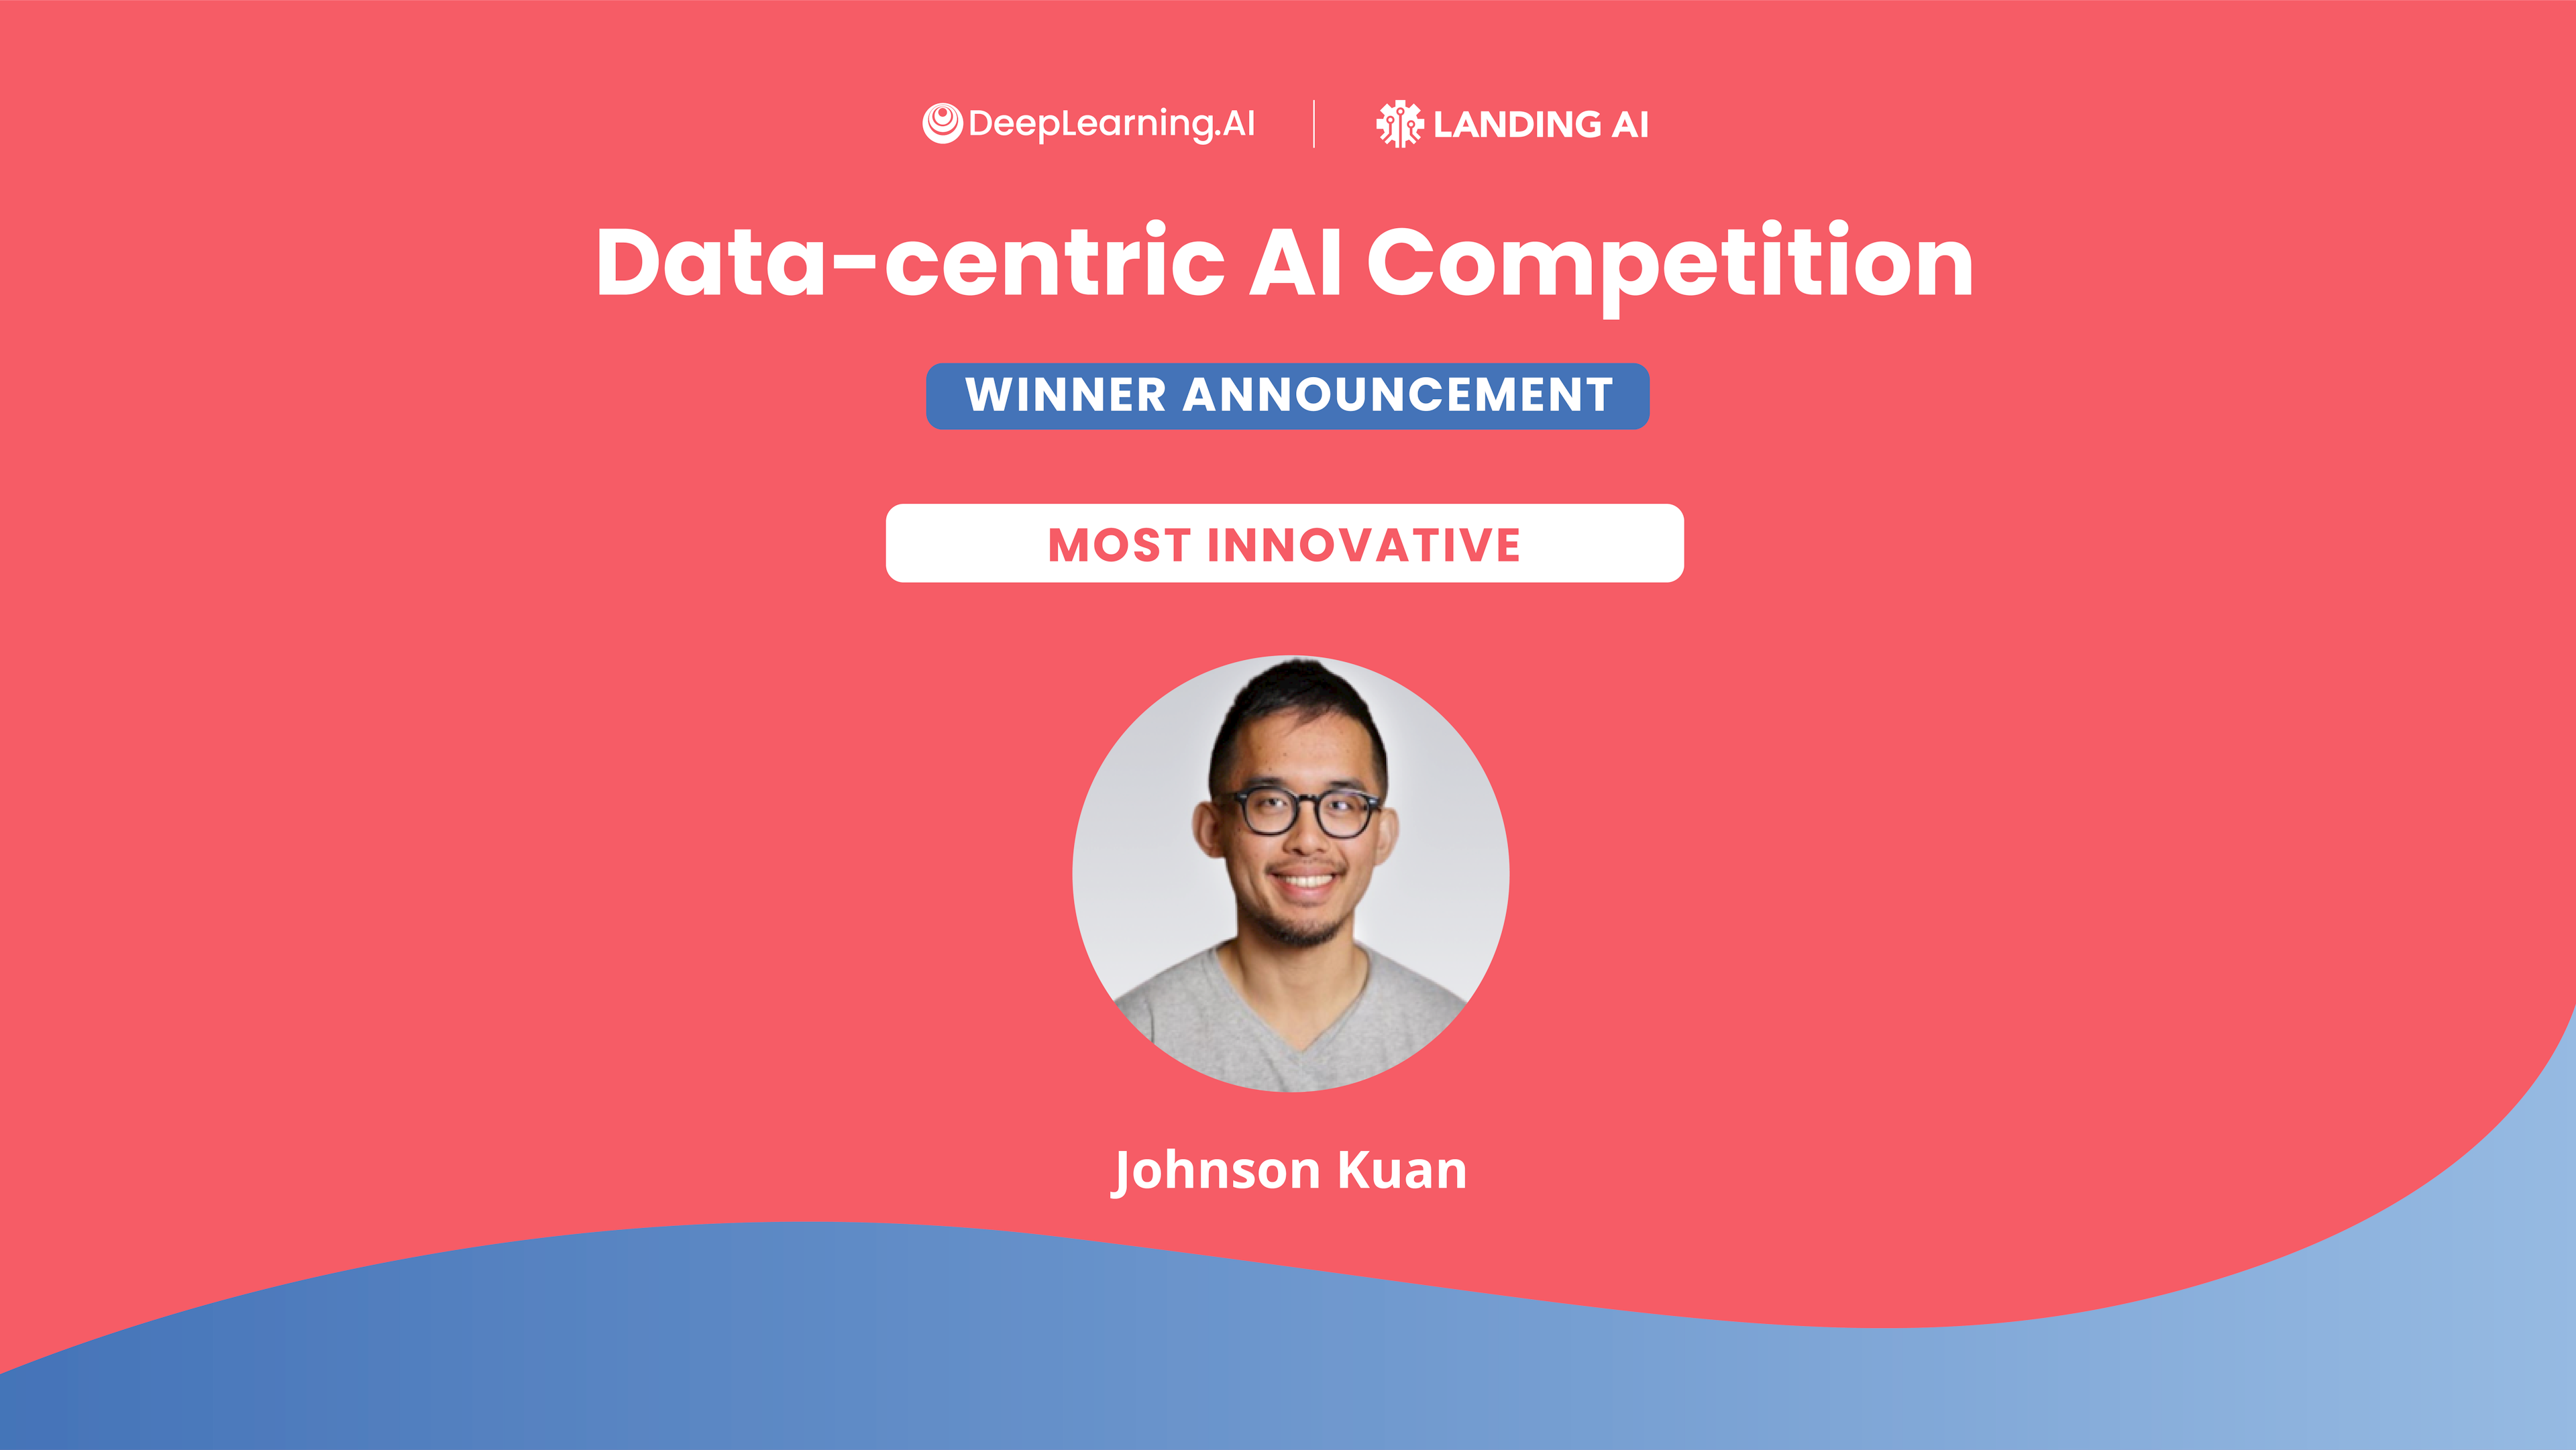 How I Won the First Data-centric AI Competition: Johnson Kuan